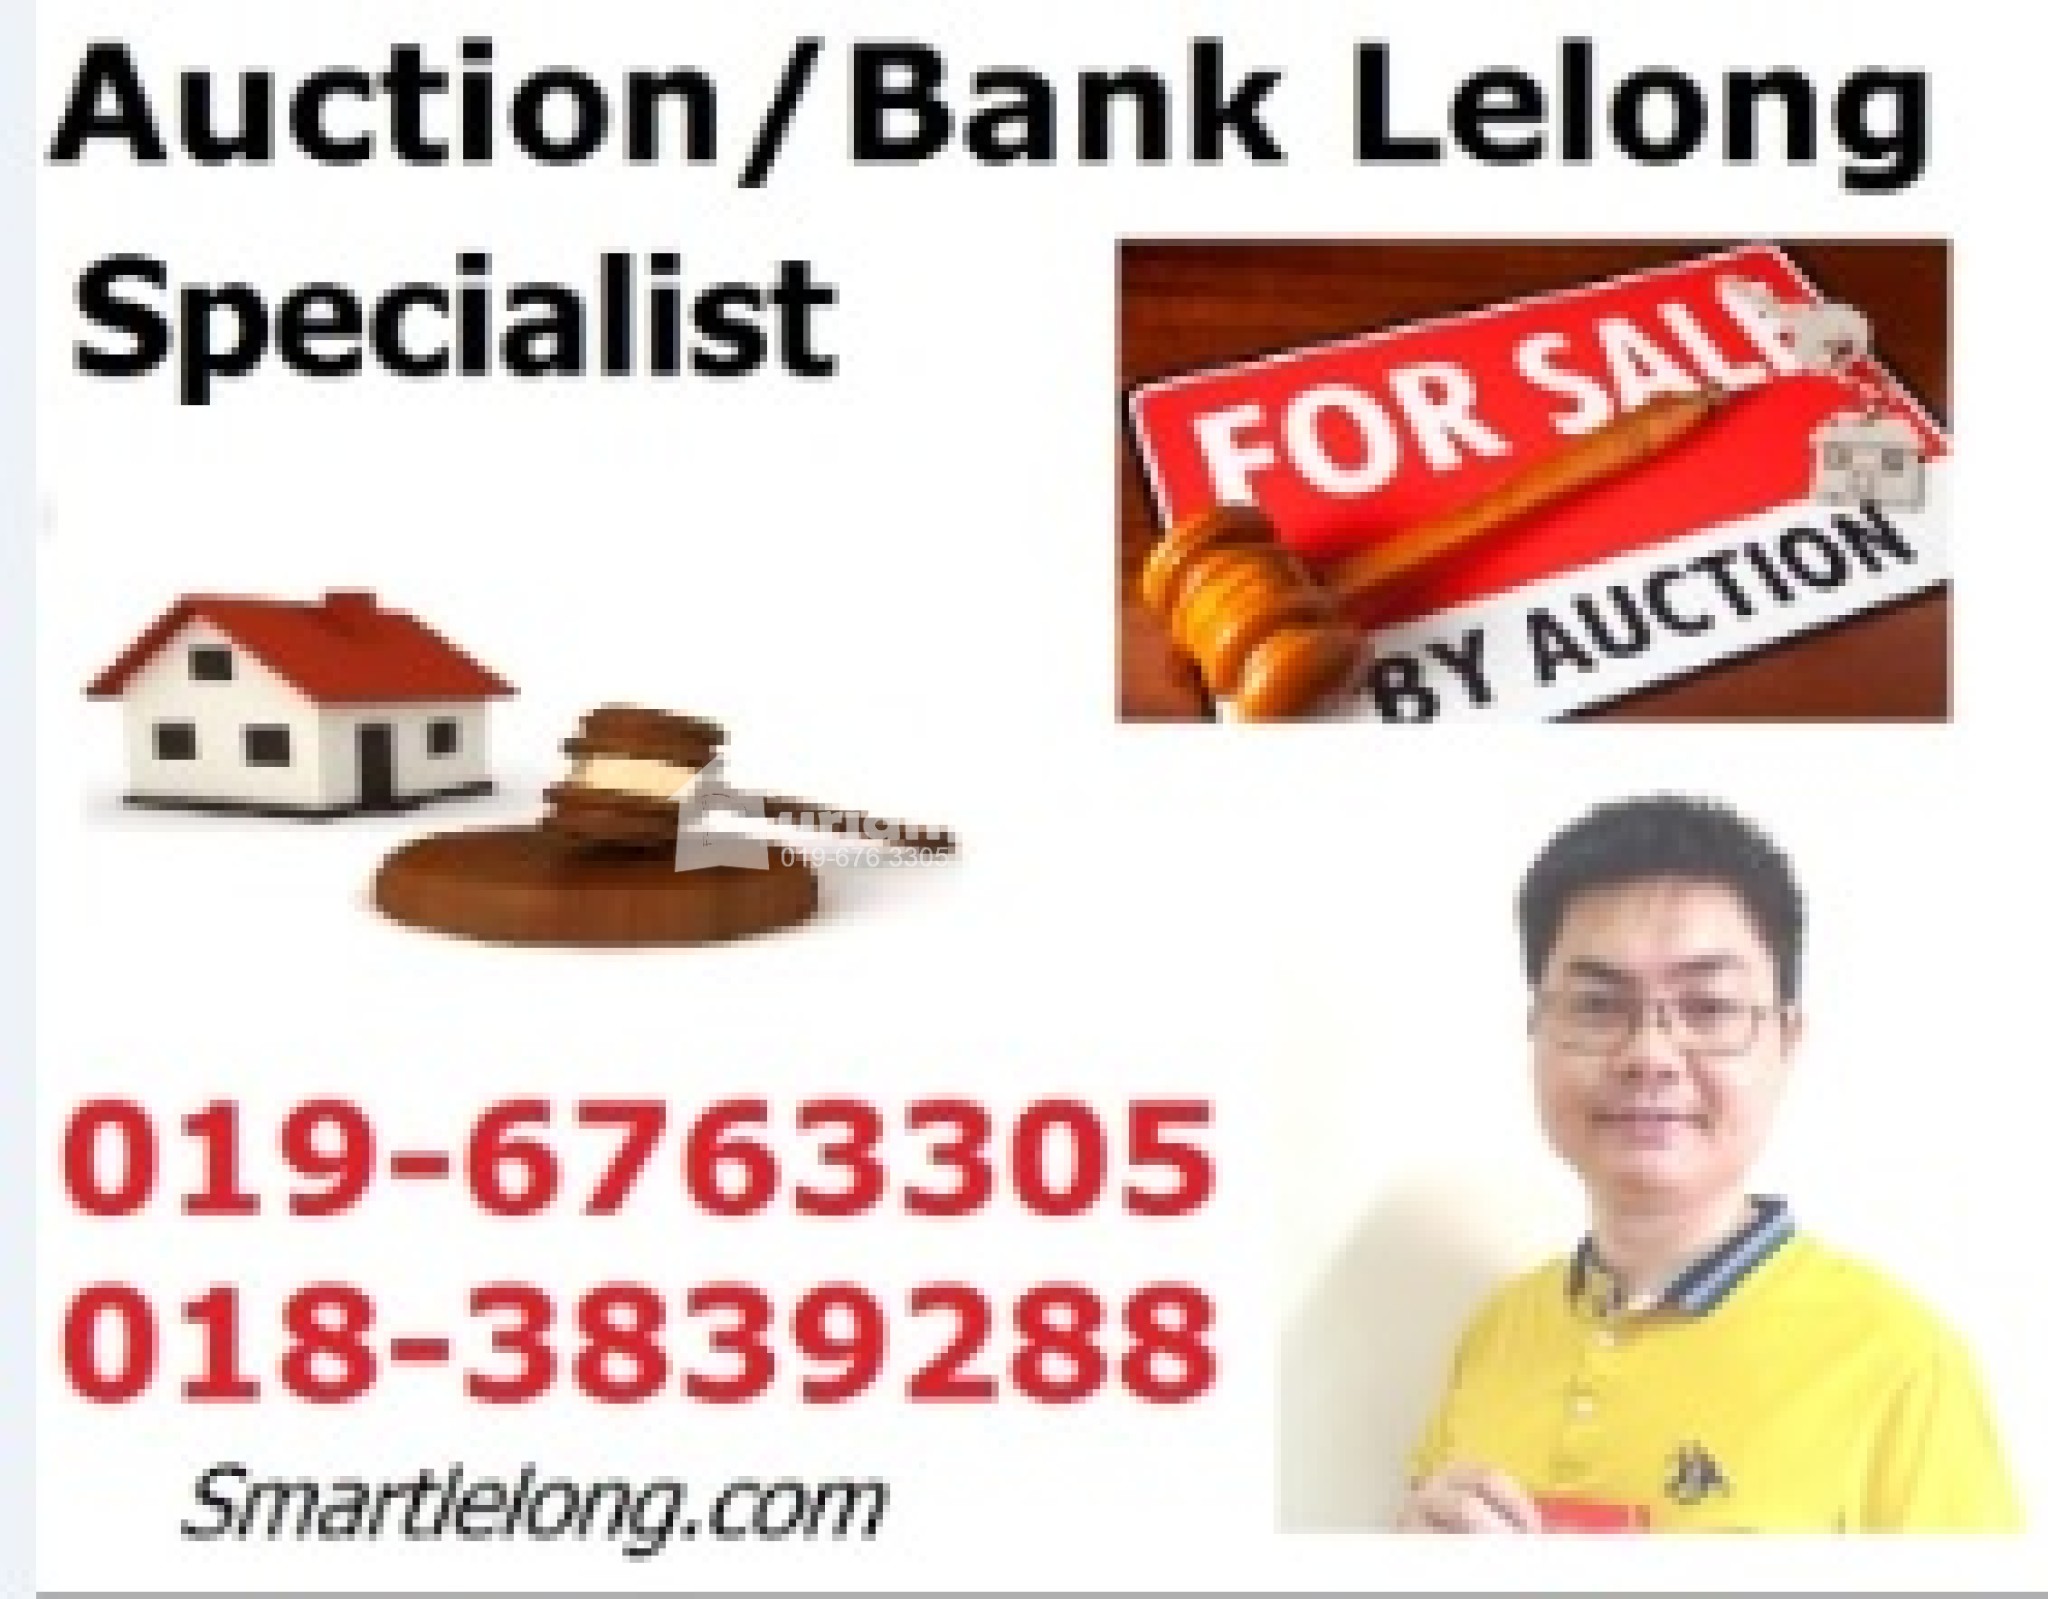 Terrace House For Auction at Taman Rinting